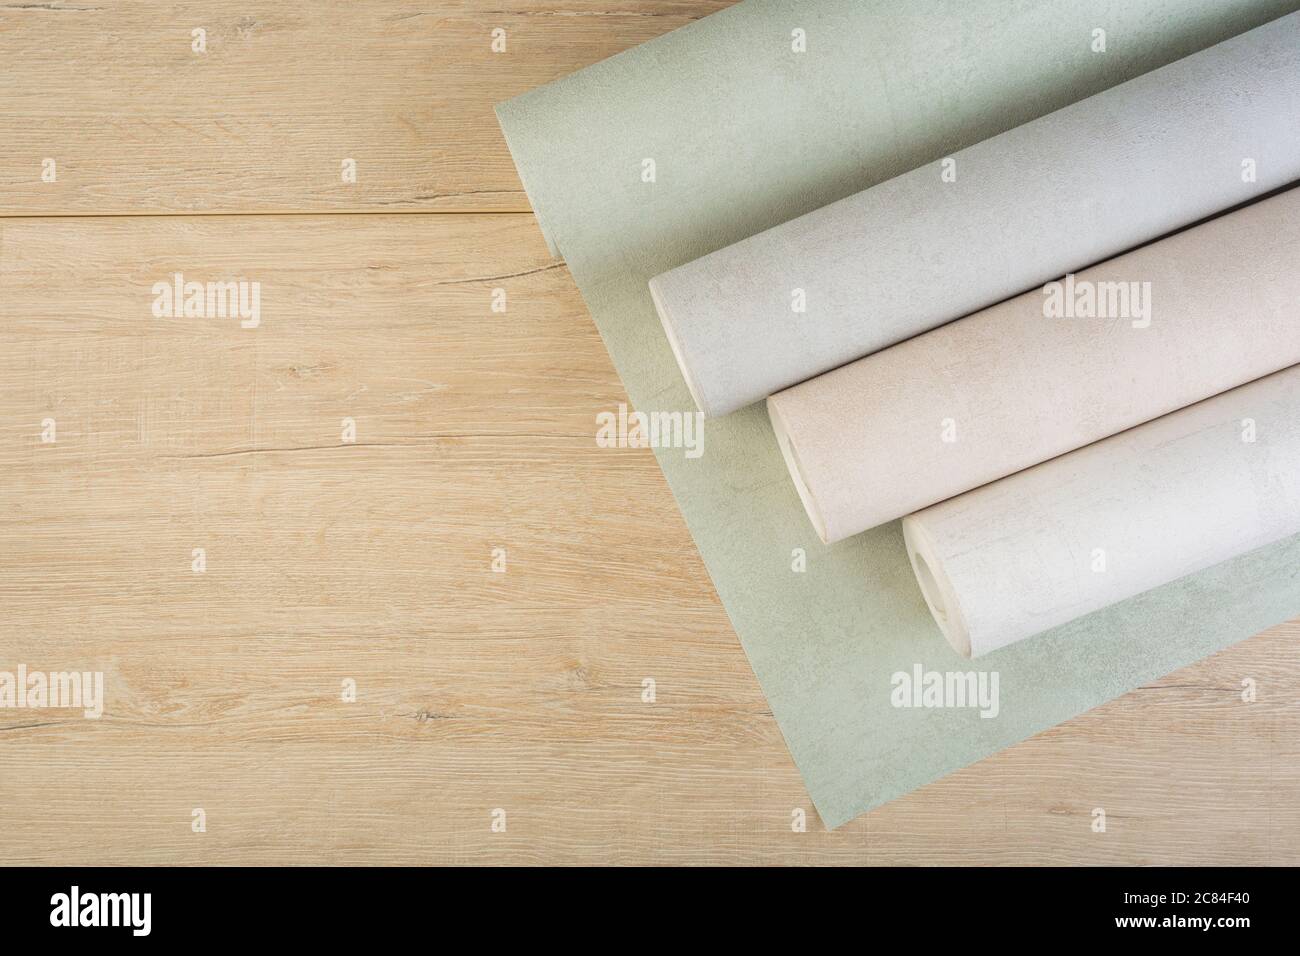 several rolls of multi-colored paper wallpaper on a wooden table Stock Photo